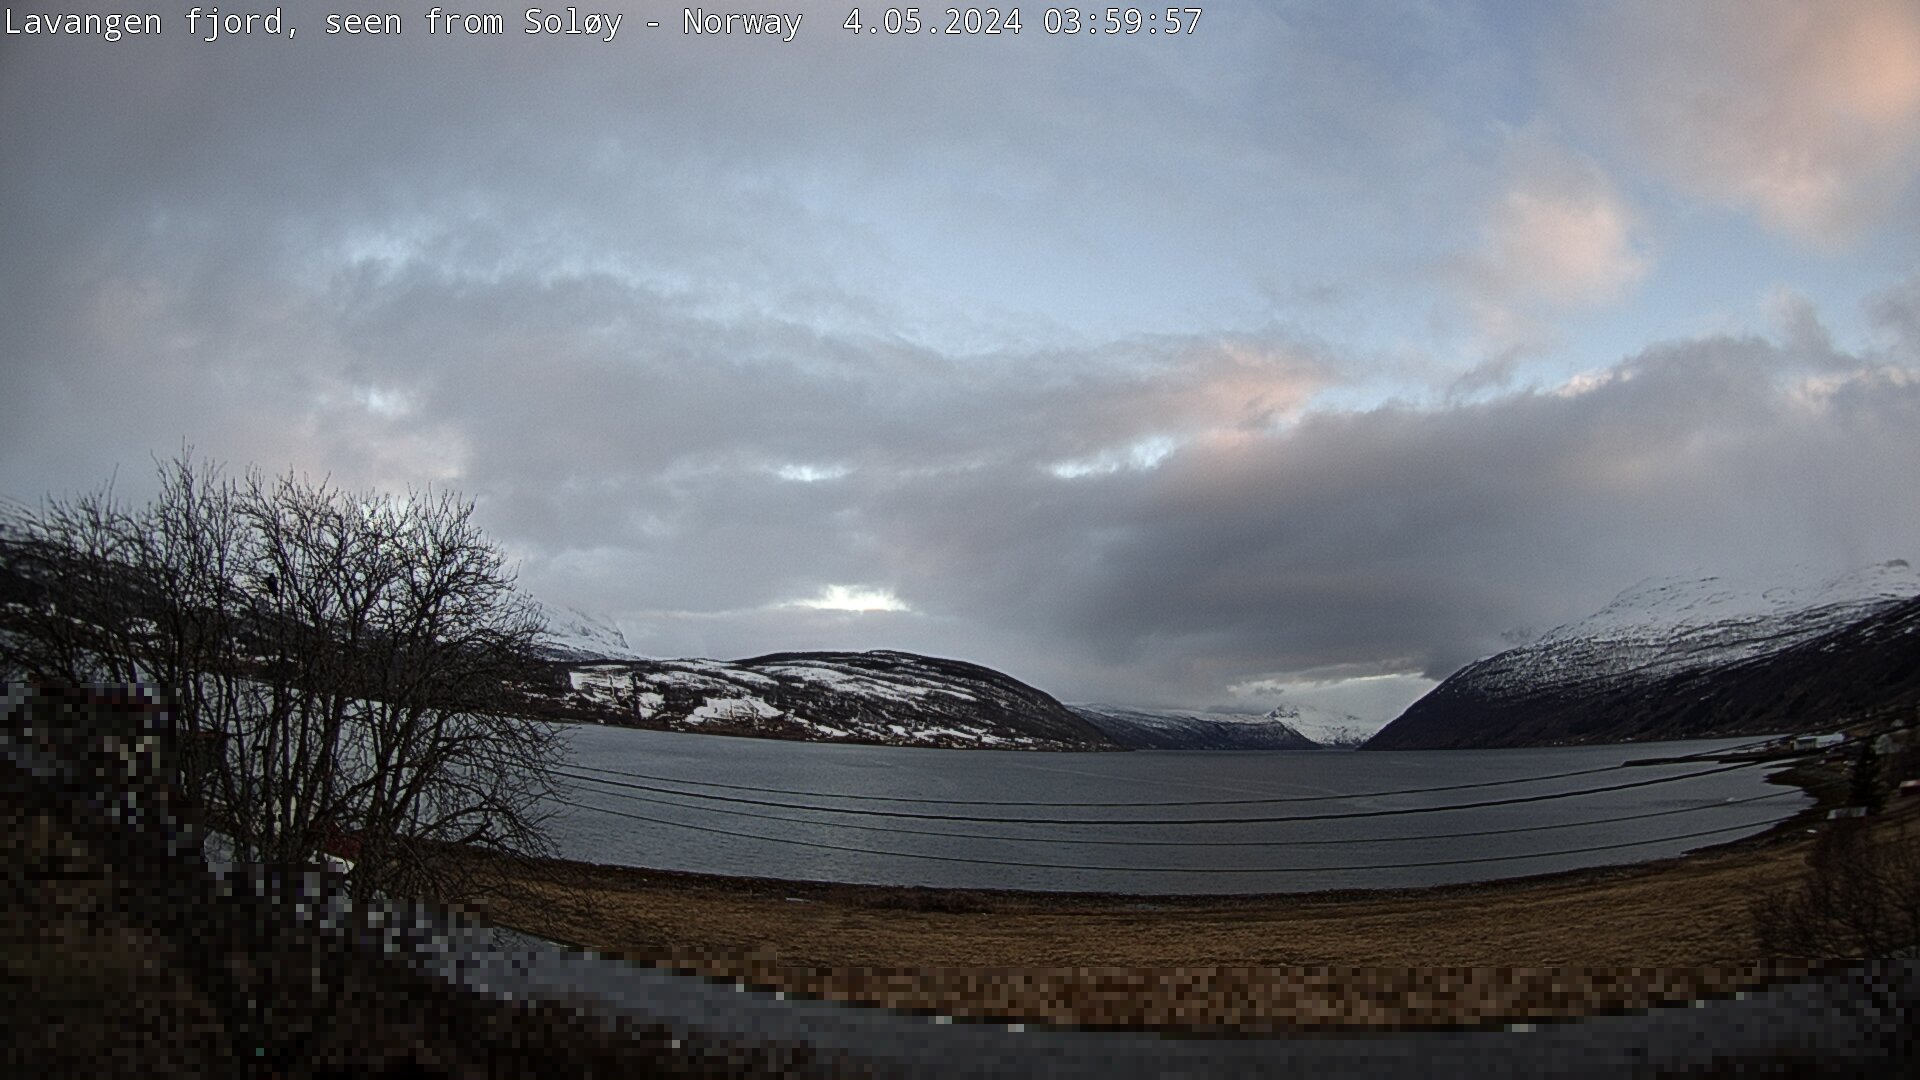 Camera showing live image of Lavangen fjord. It is often called Norway's quietest and most beautiful fjords.